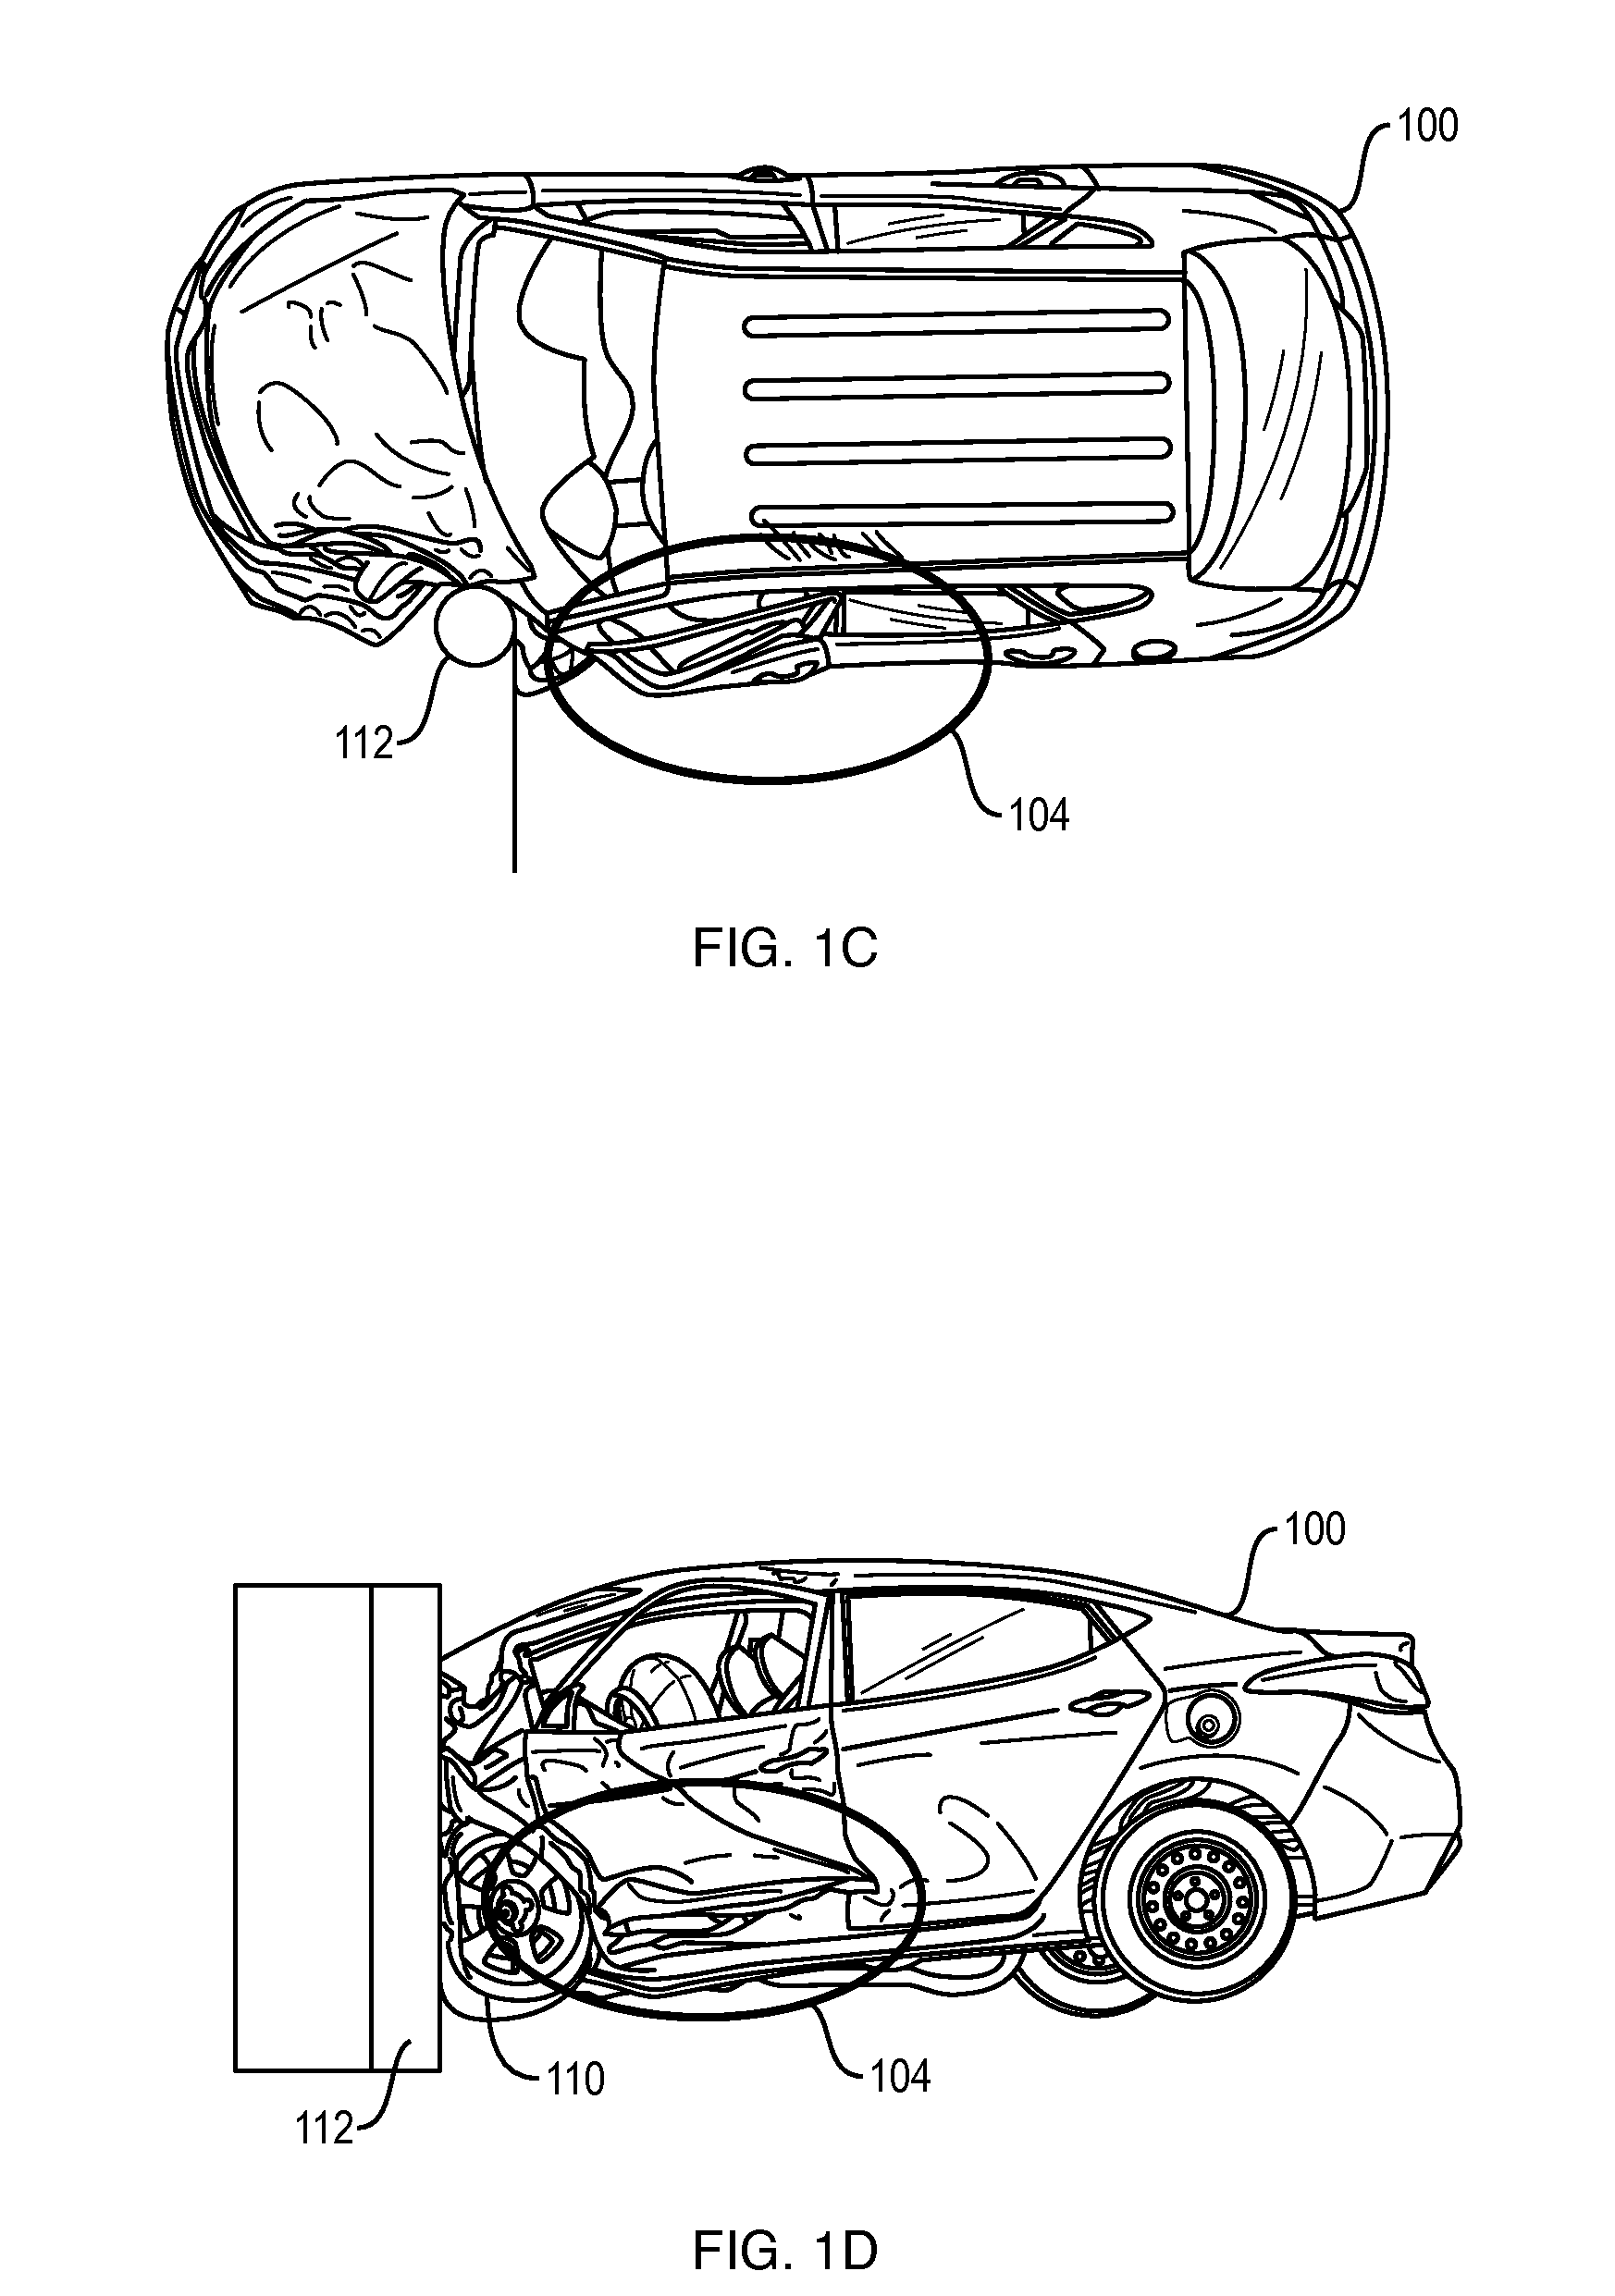 Vehicle wheel twist system for small overlap frontal collisions